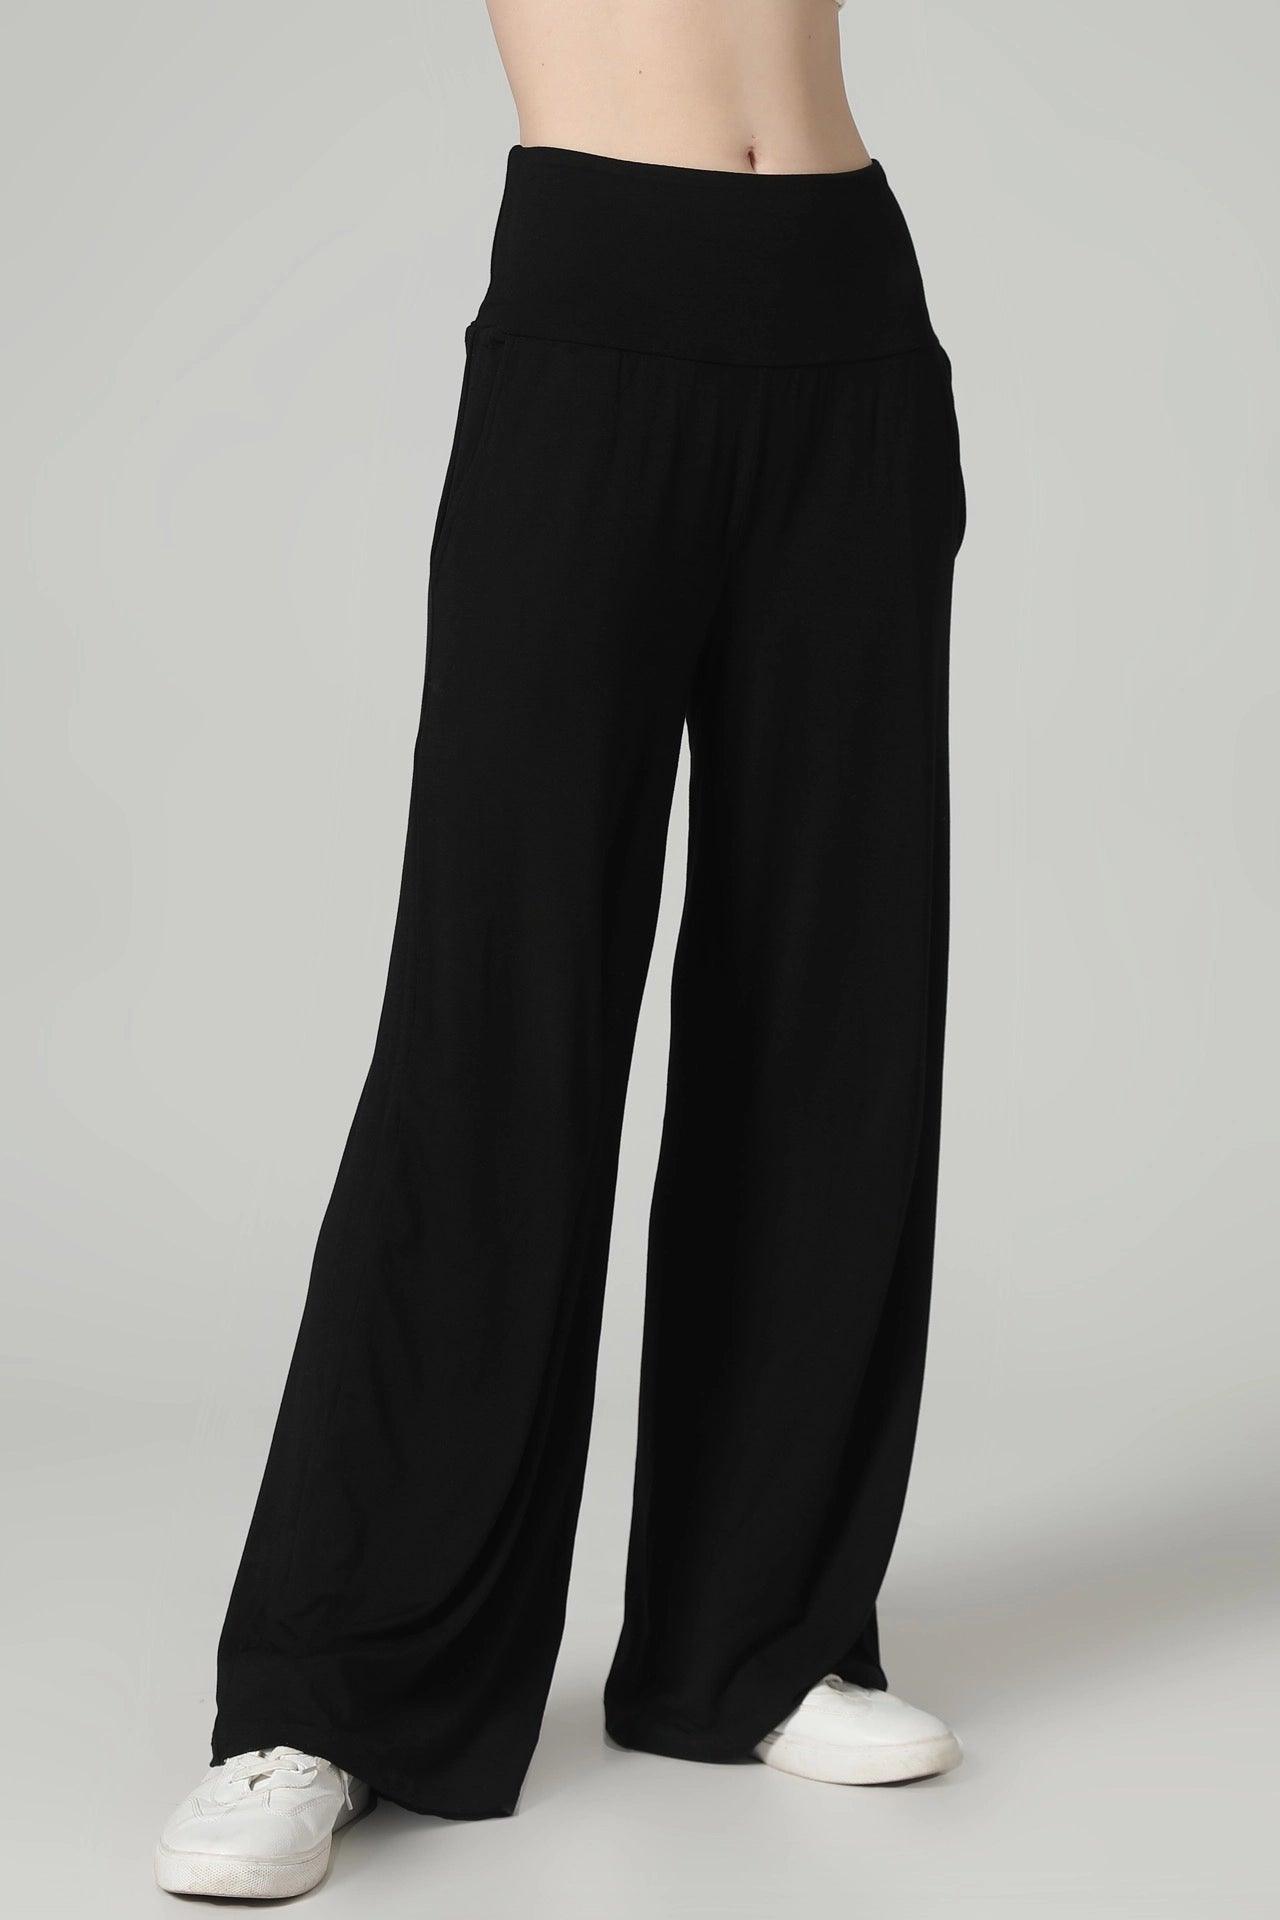 Women&#39;s Super-Soft, High-Rise, Relaxed Fit Wide Leg Sweatpant - NOT LABELED